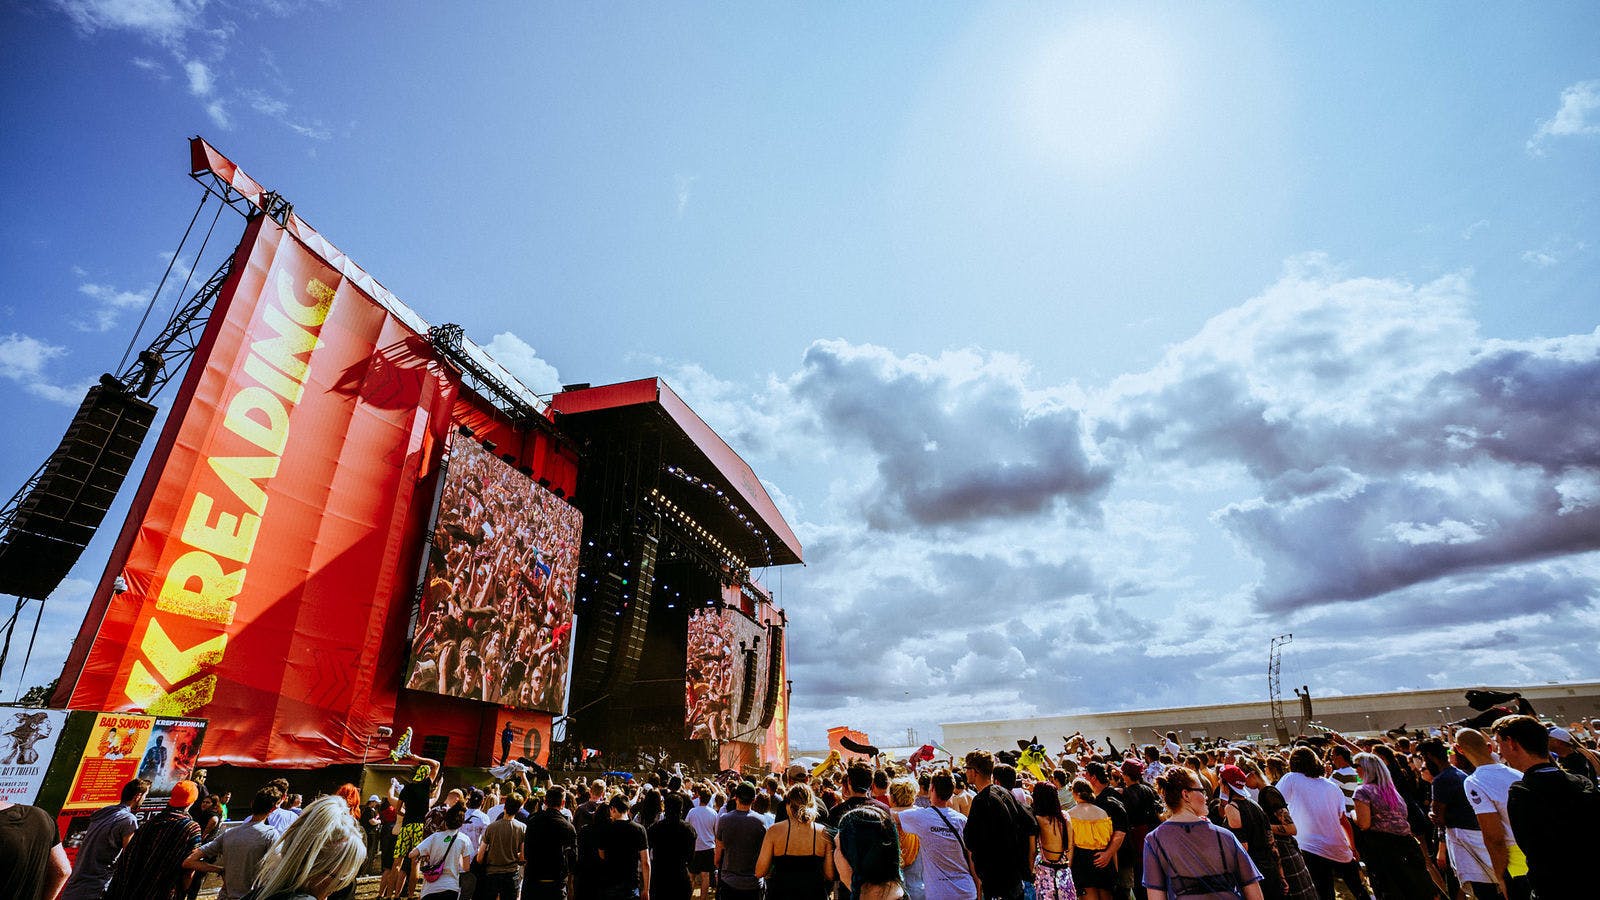 Has The First Reading & Leeds 2020 Headliner Been Revealed?